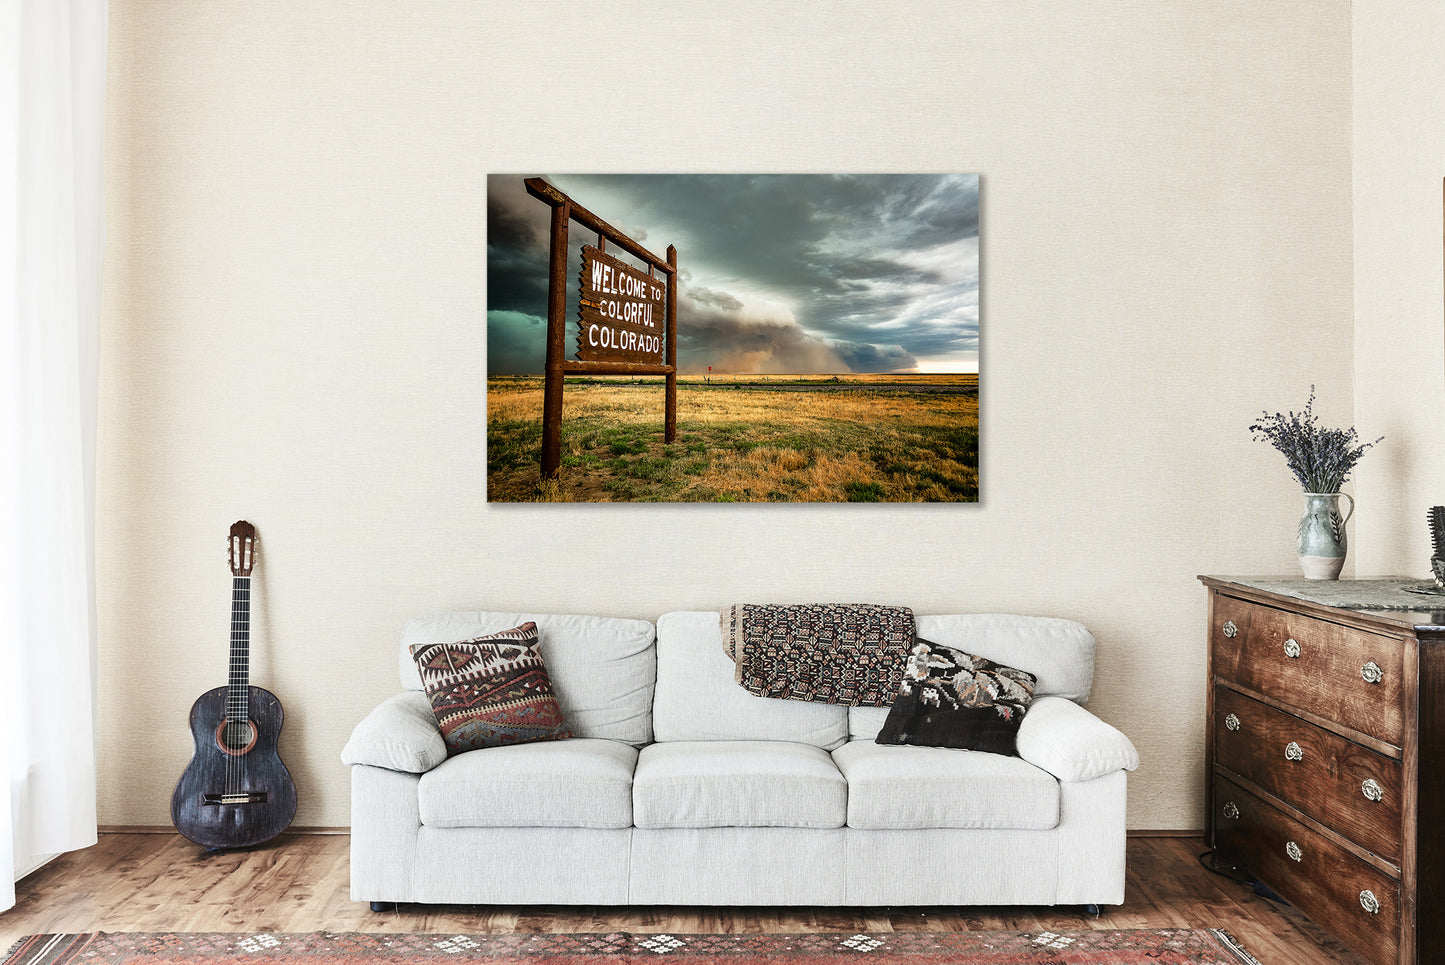 Storm Metal Print (Ready to Hang) Photo on Aluminum of Thunderstorm Advancing Past Colorado Colorado State Line Sign Great Plains Wall Art Western Decor